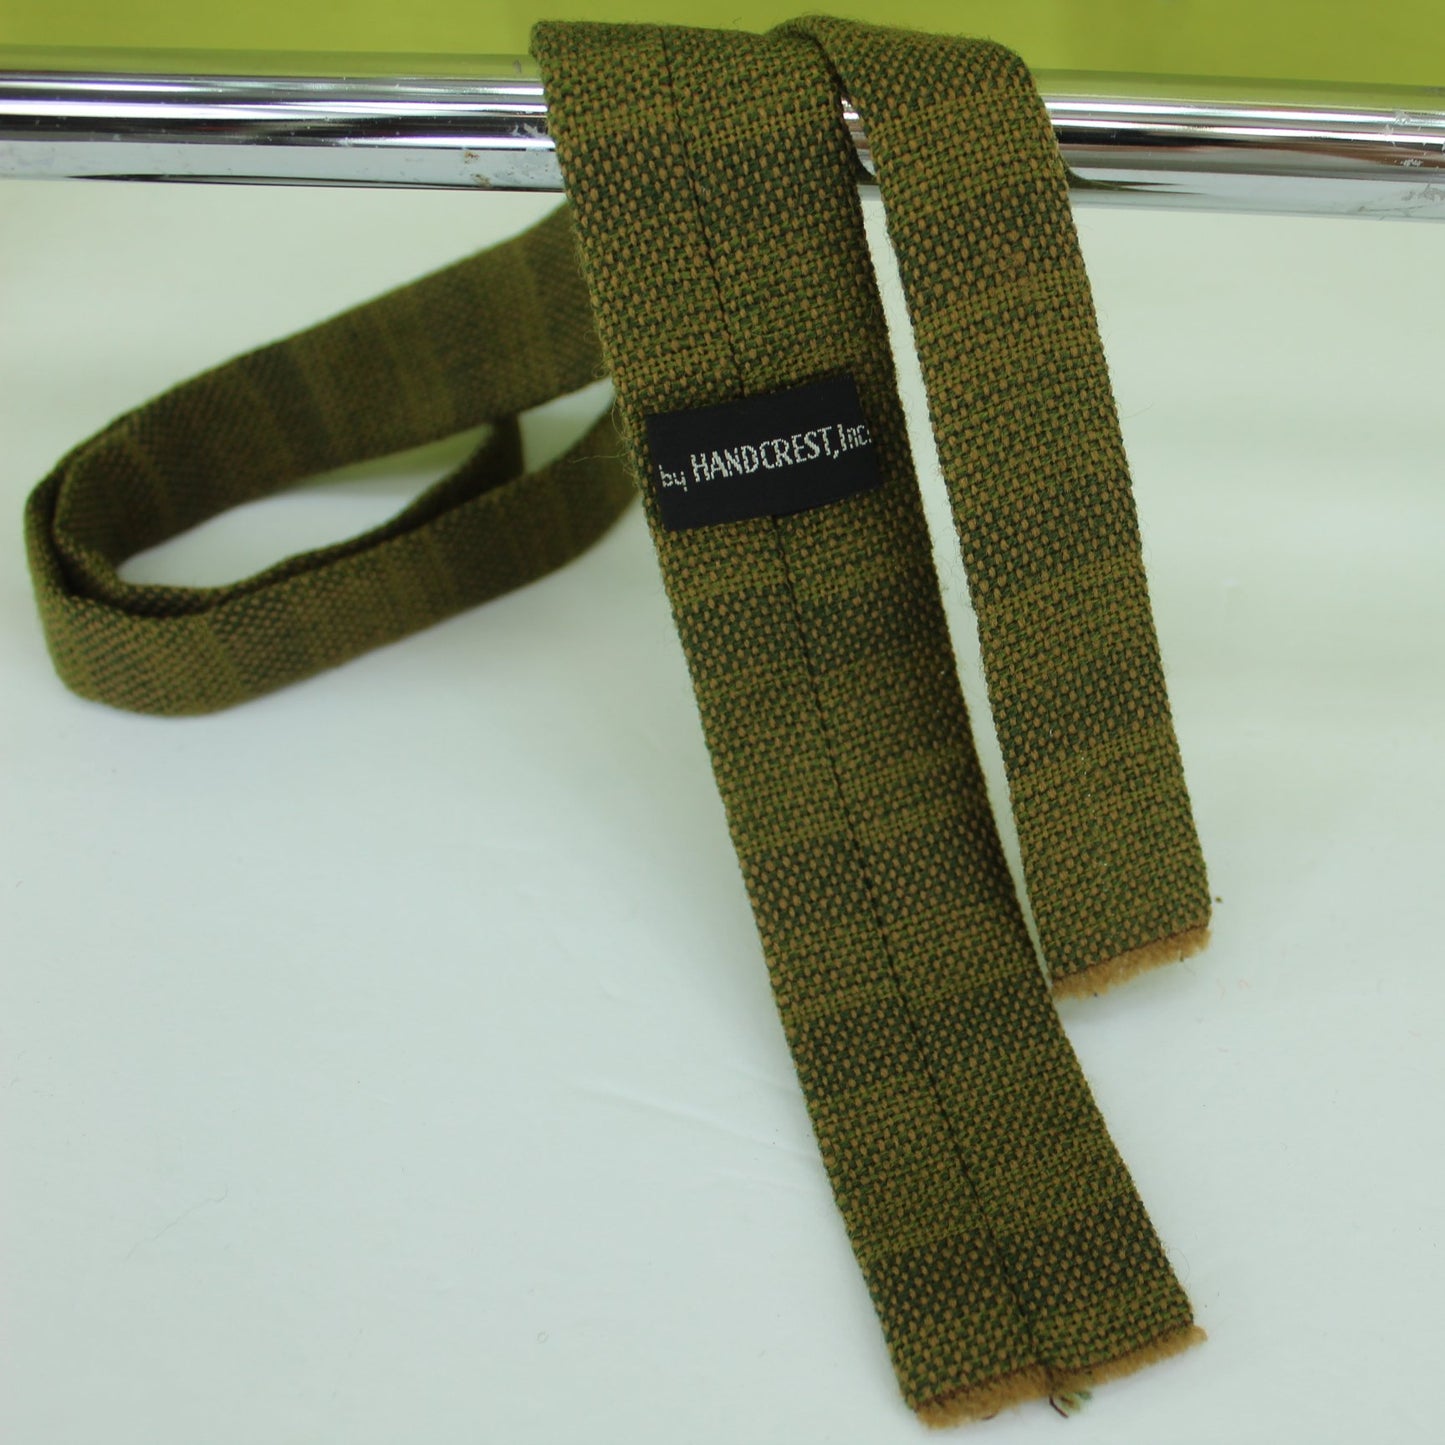 Handcrest Skinny Wool Necktie Hand Woven Square End Brown Green 53" X 1 5/8" MCM reverse of tie